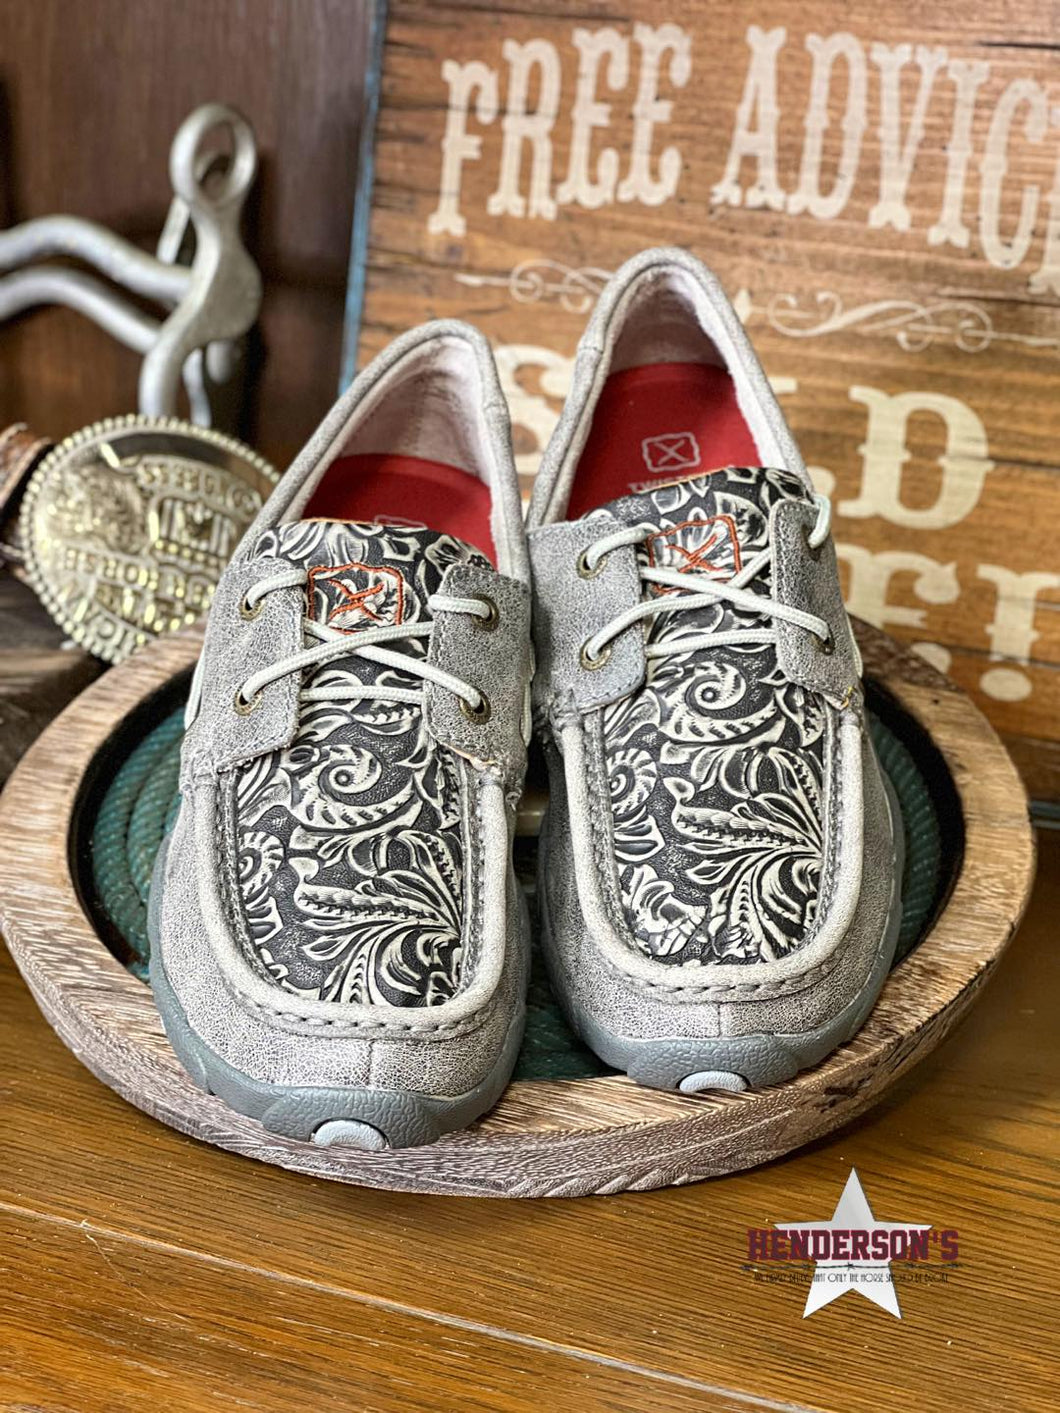 Tooled Boat Shoe by Twisted X - Henderson's Western Store